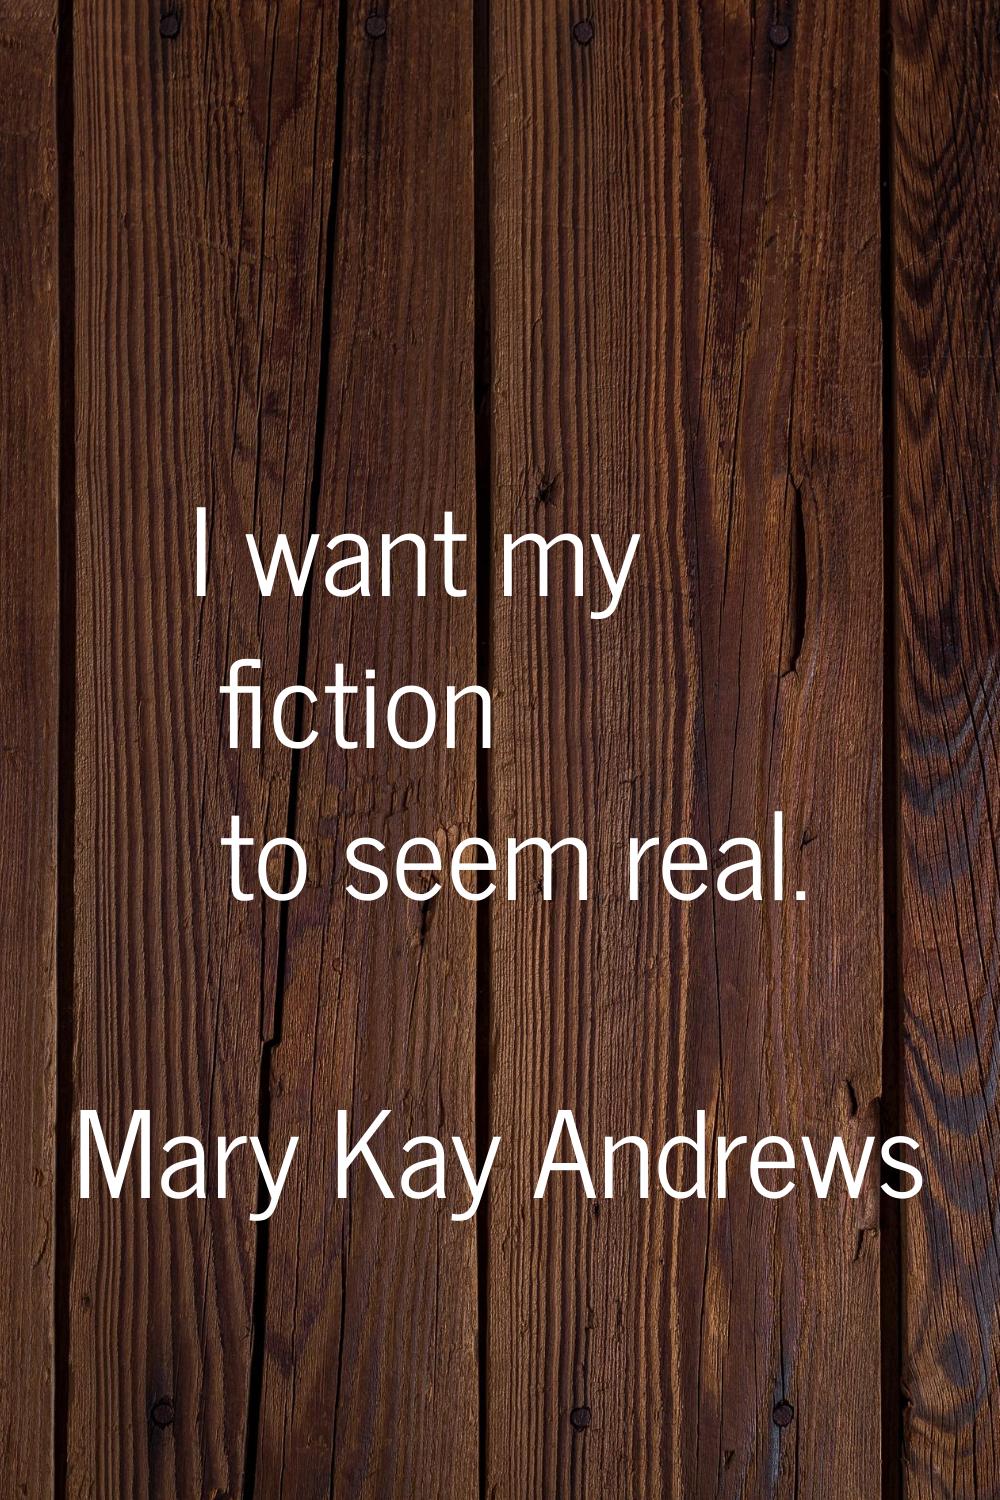 I want my fiction to seem real.